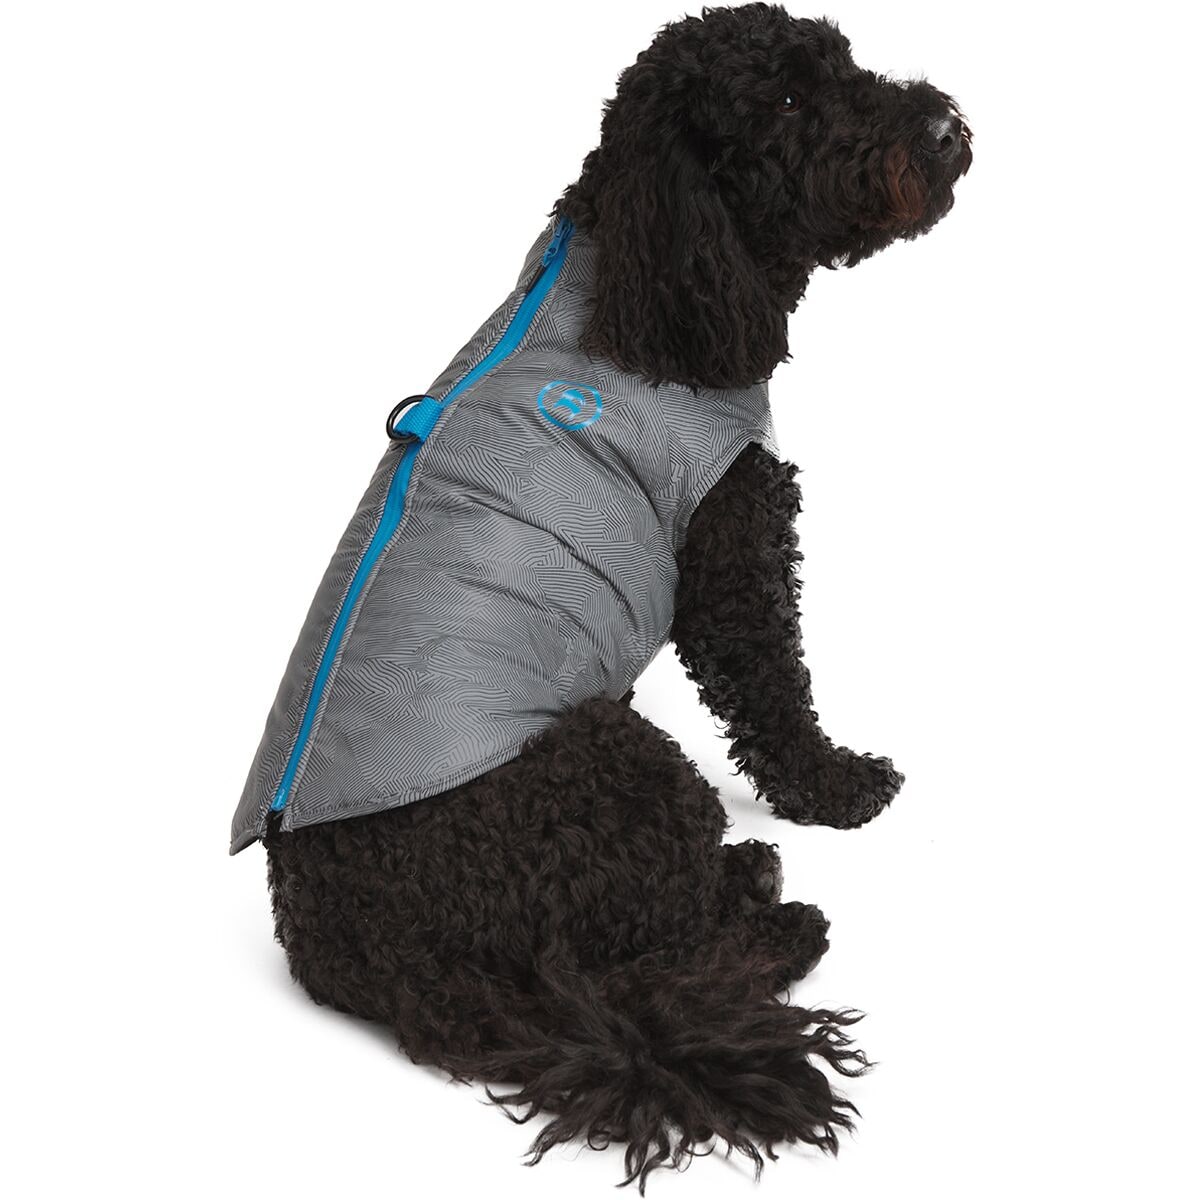 Backcountry x Petco The 2-in-1 Harness Jacket